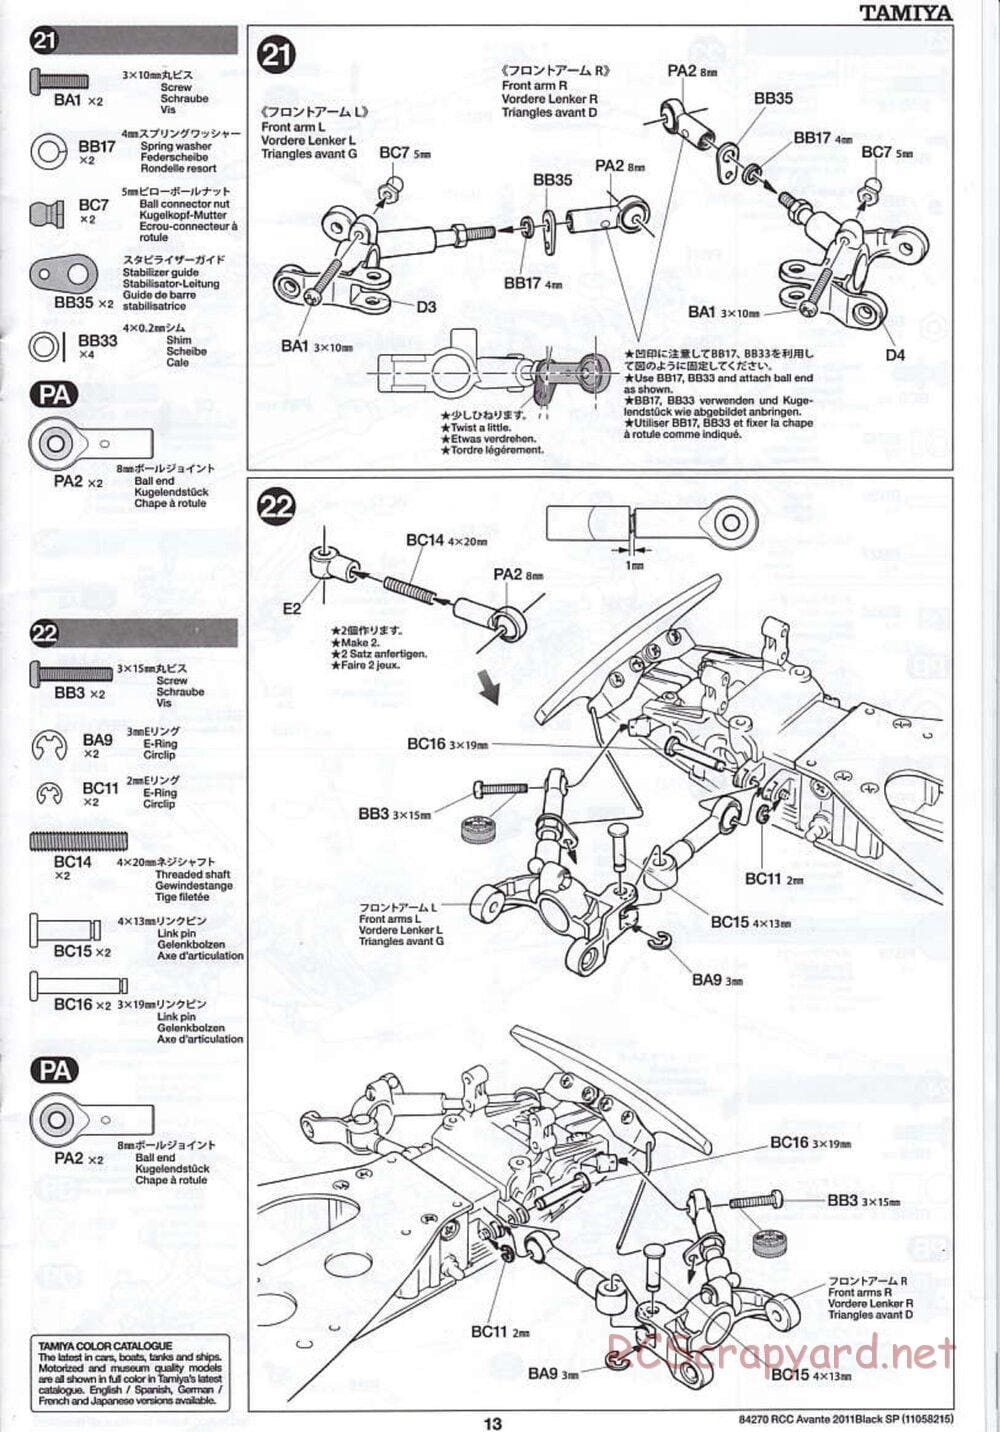 Tamiya - Avante 2011 - Black Special Chassis - Manual - Page 13